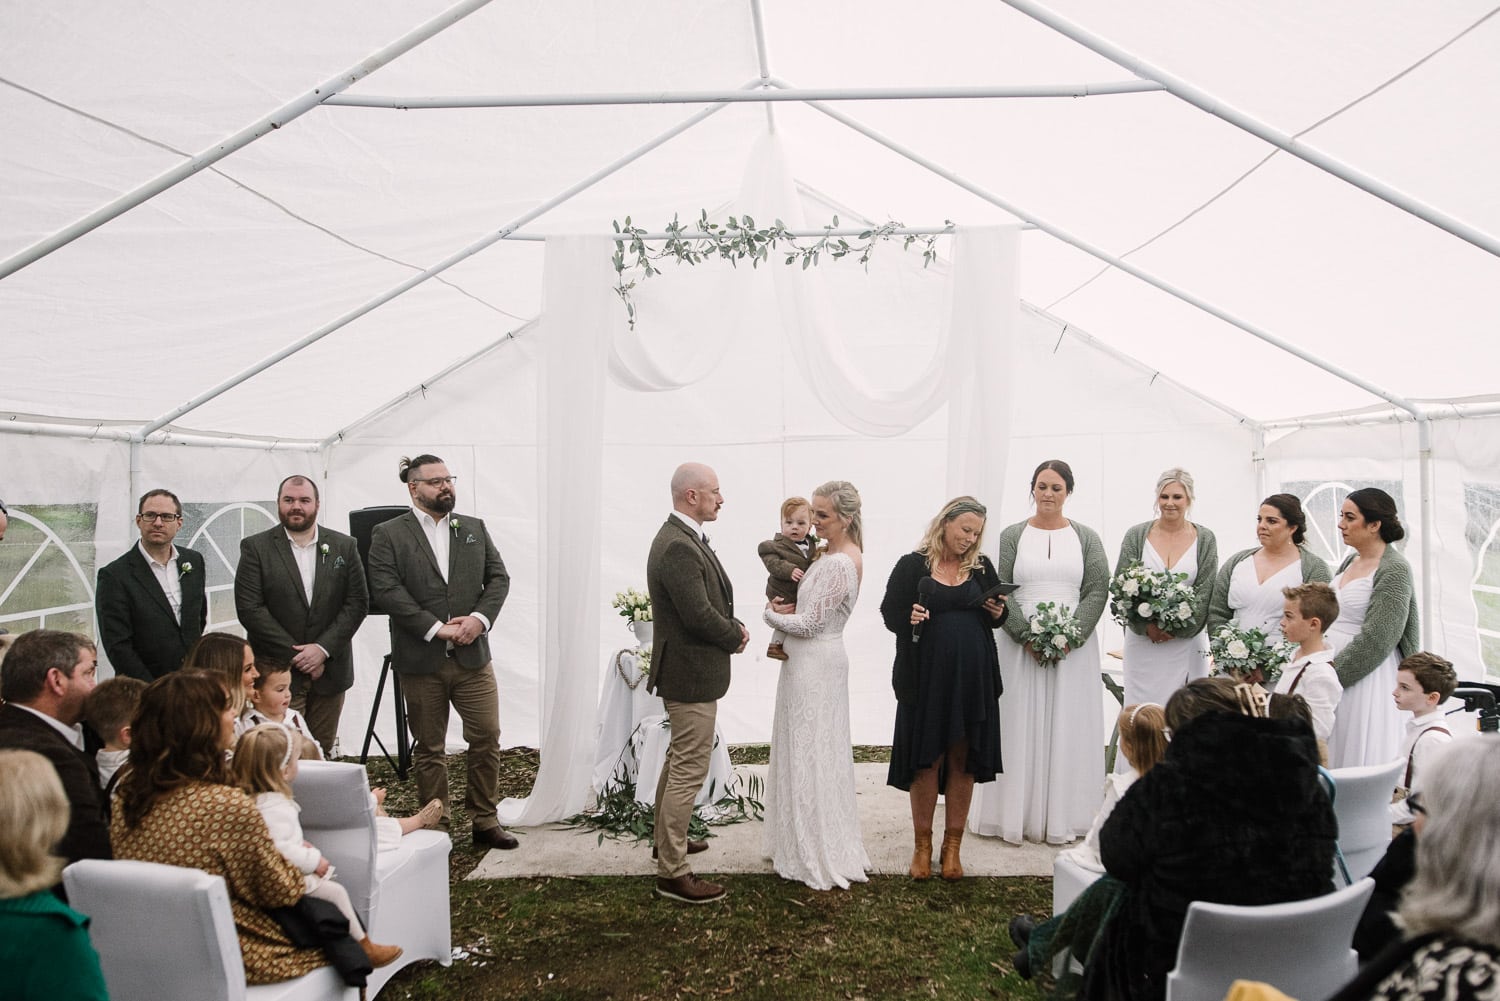 Otways Winter Wedding – Penny and Oliver